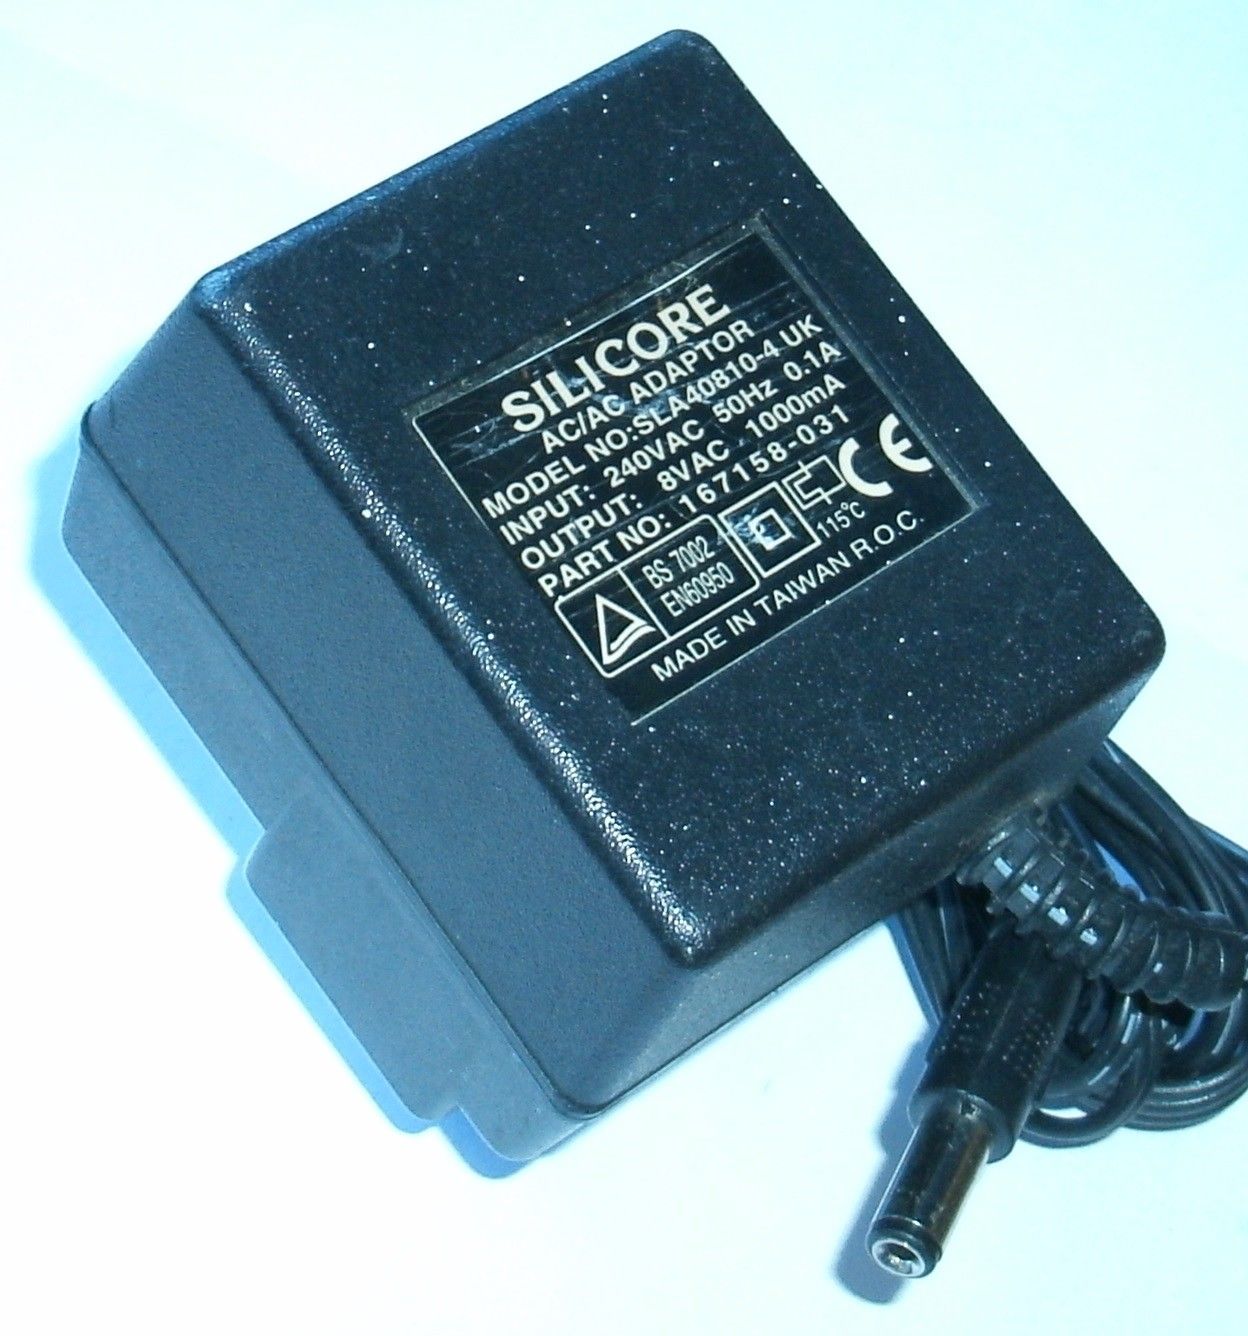 New 8V 1A SILICORE SLA40810-4 167158-031 Power Supply AC ADAPTER